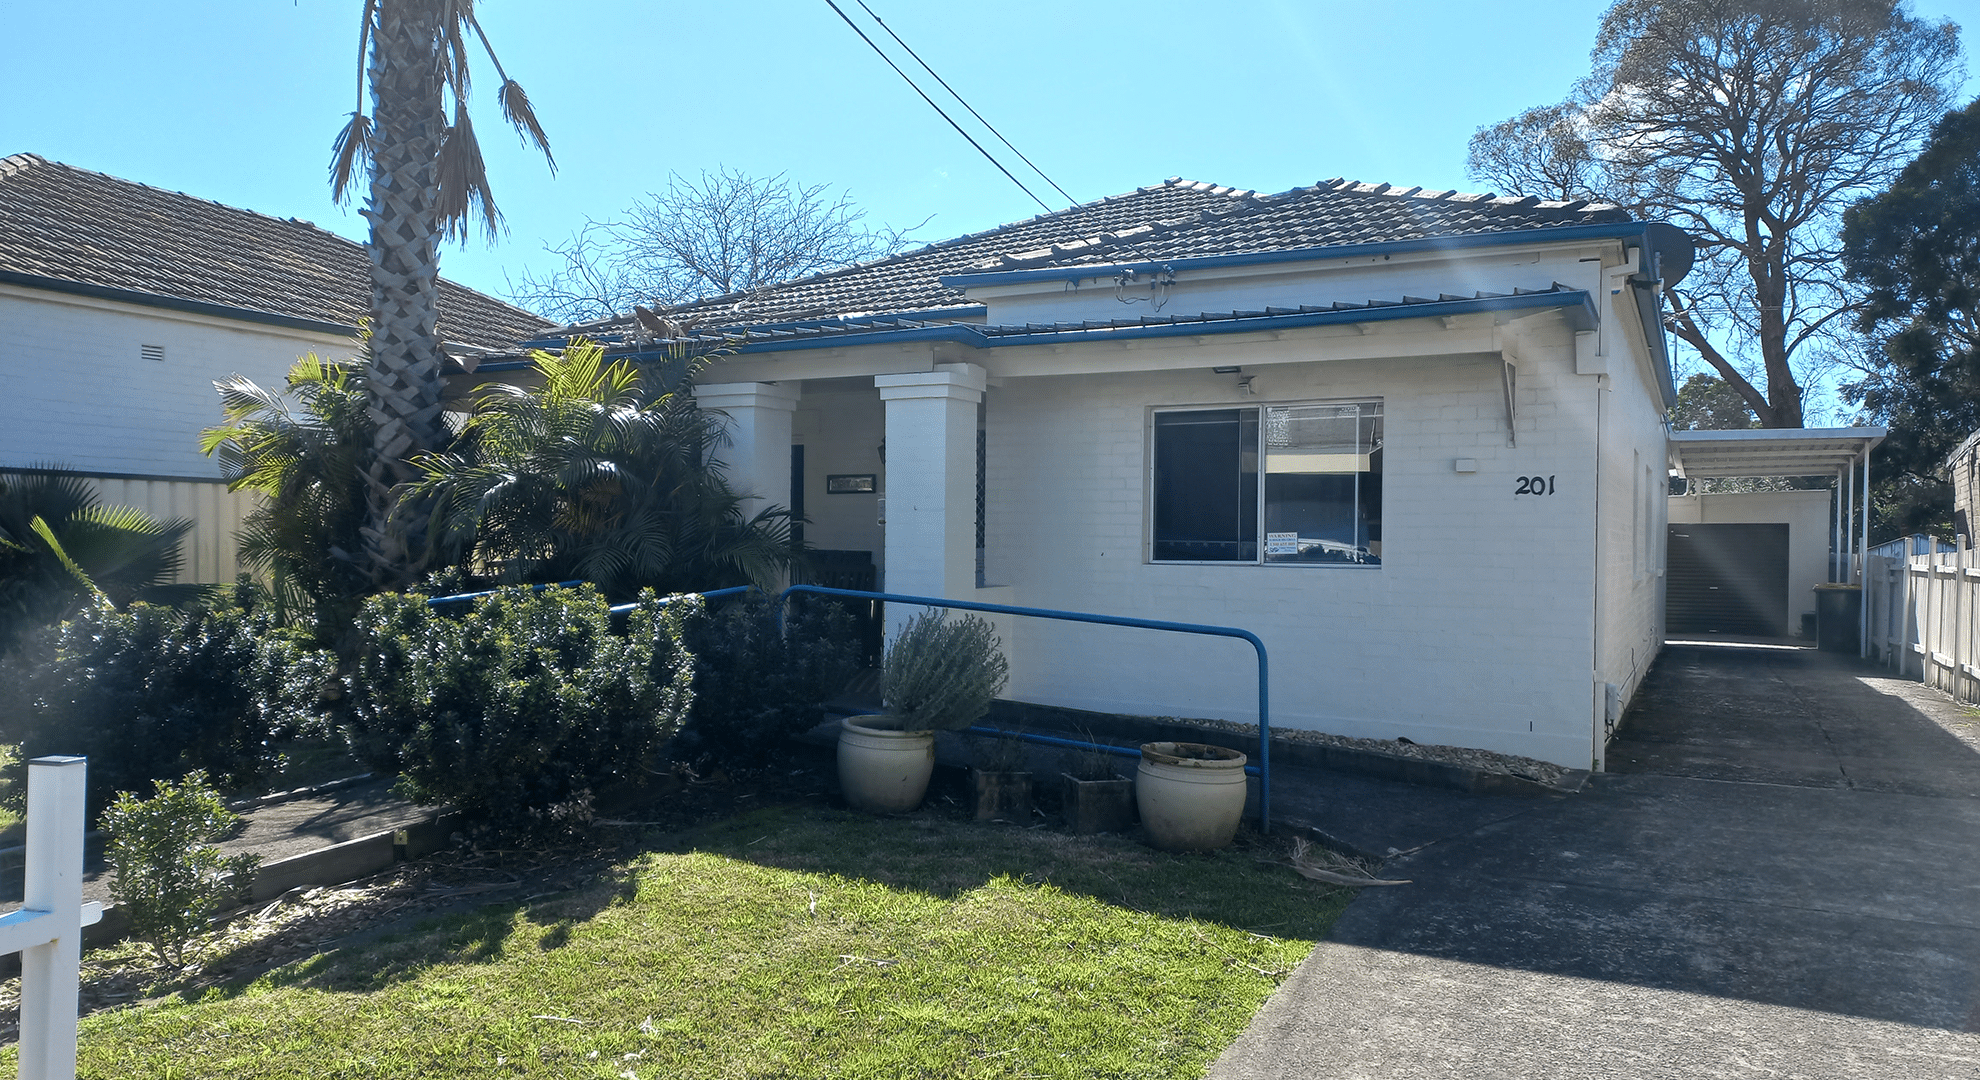 View of the front of the single story brick home with front garden, driveway and lock up garage at the rear of the property.